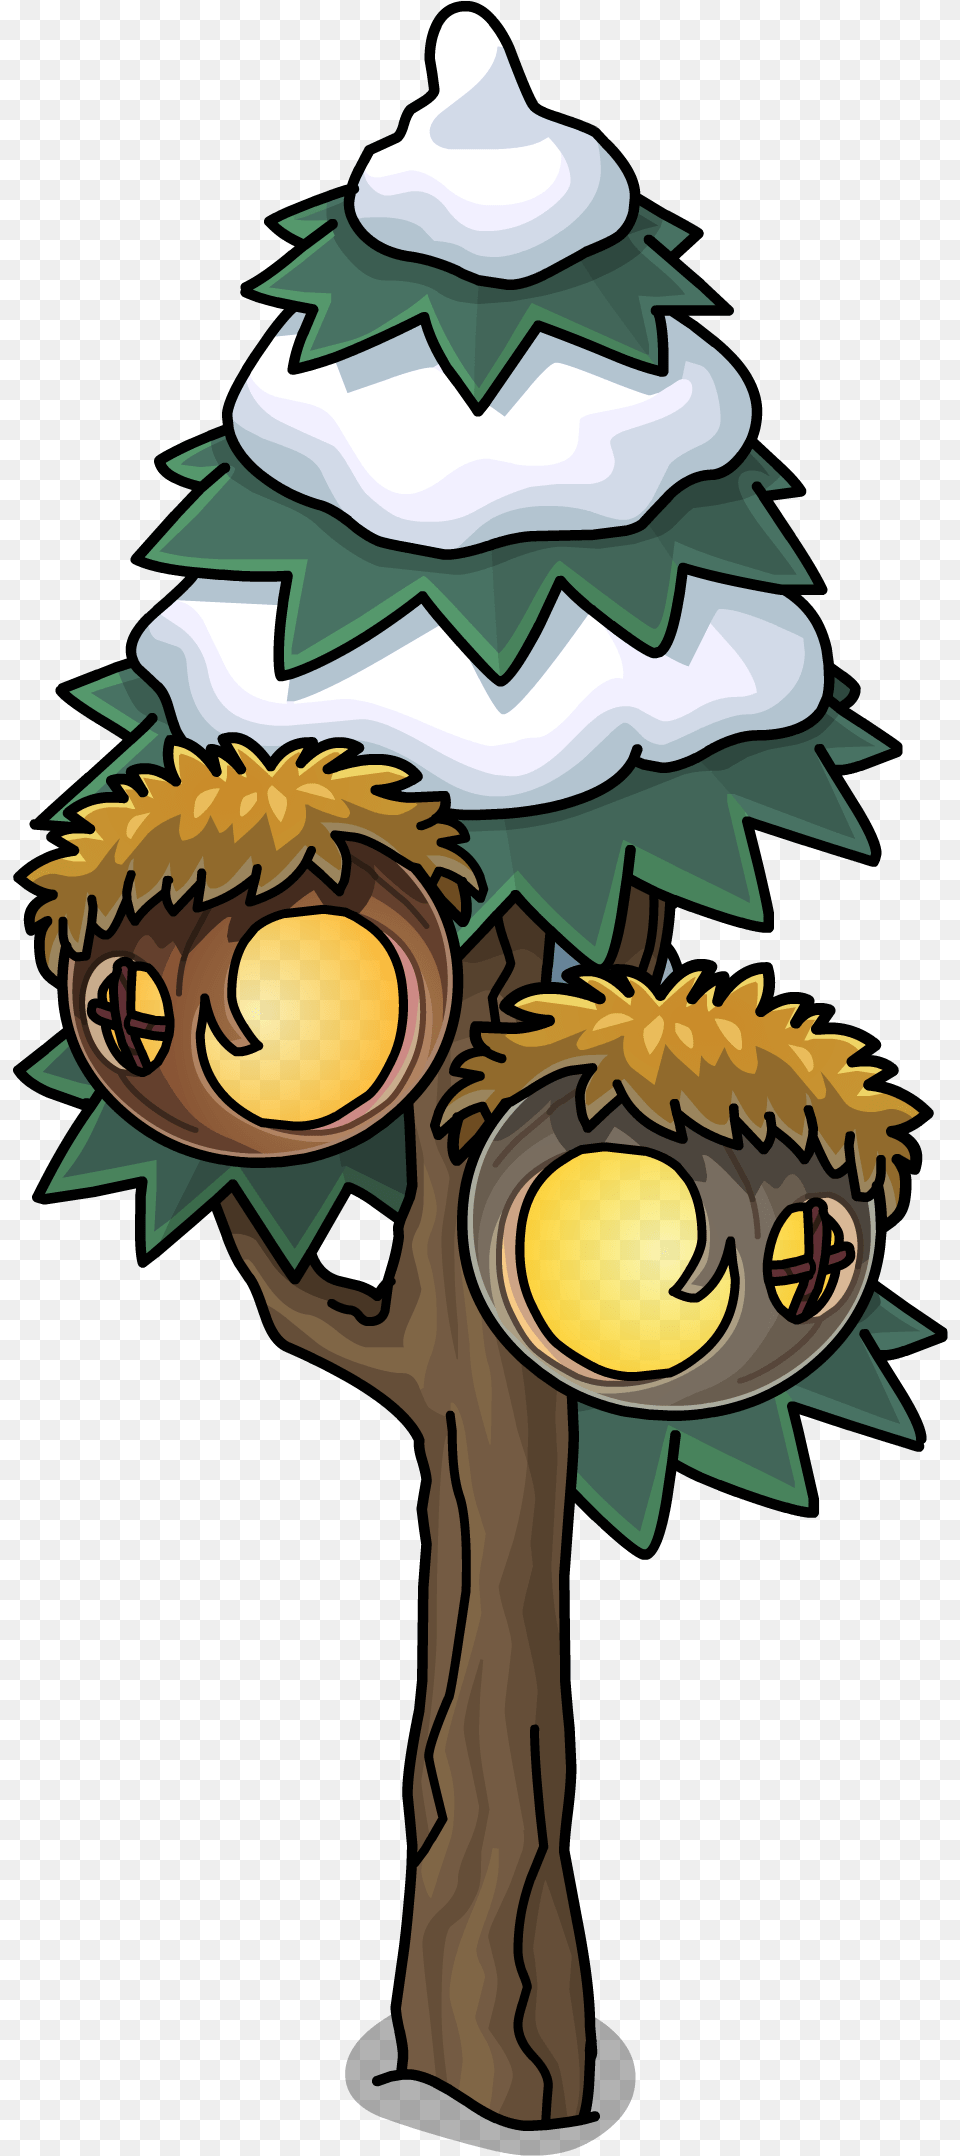 Download Hd Wilds Puffle Treehouse In Game Cartoon Club Penguin Tree, Cross, Symbol, Festival Png Image